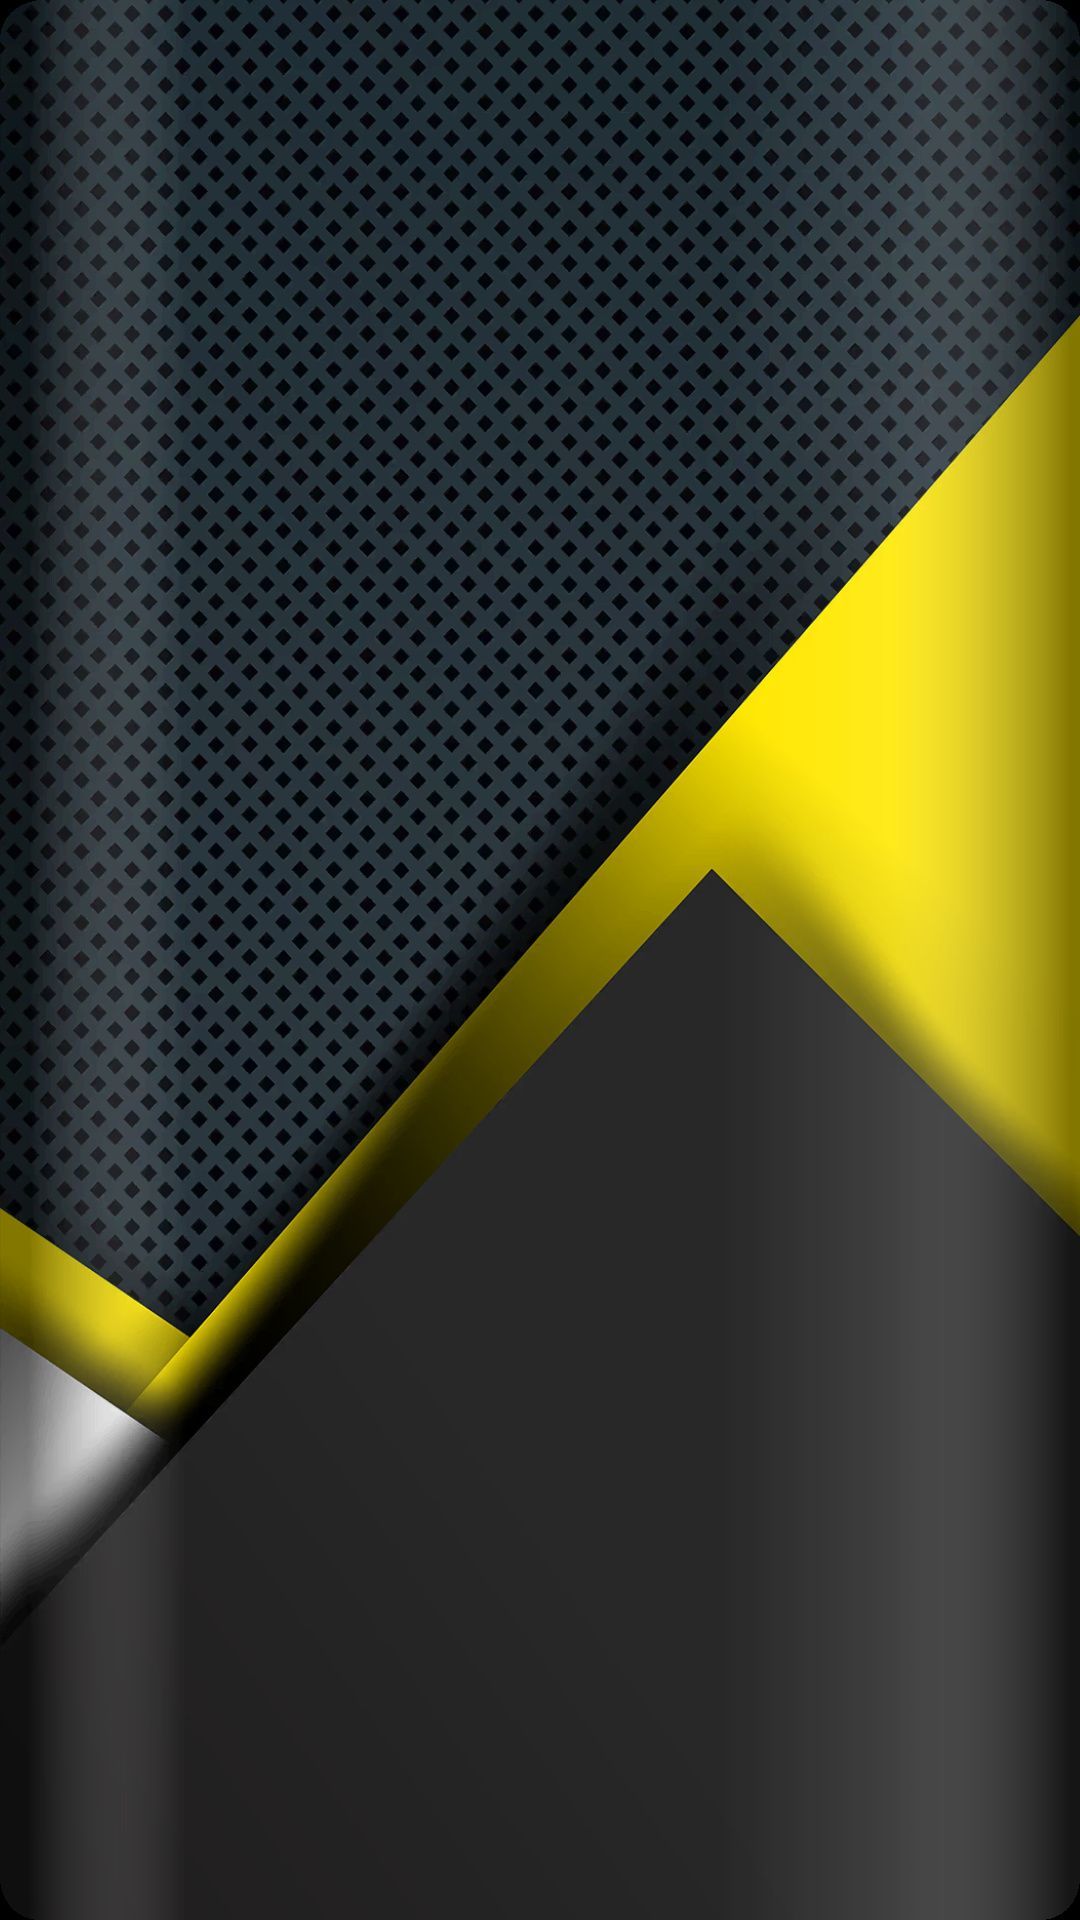 Abstract shape, design and pattern wallpaper in HD resolution designed and sized specifically to. Abstract iphone wallpaper, Mobile wallpaper, Abstract wallpaper